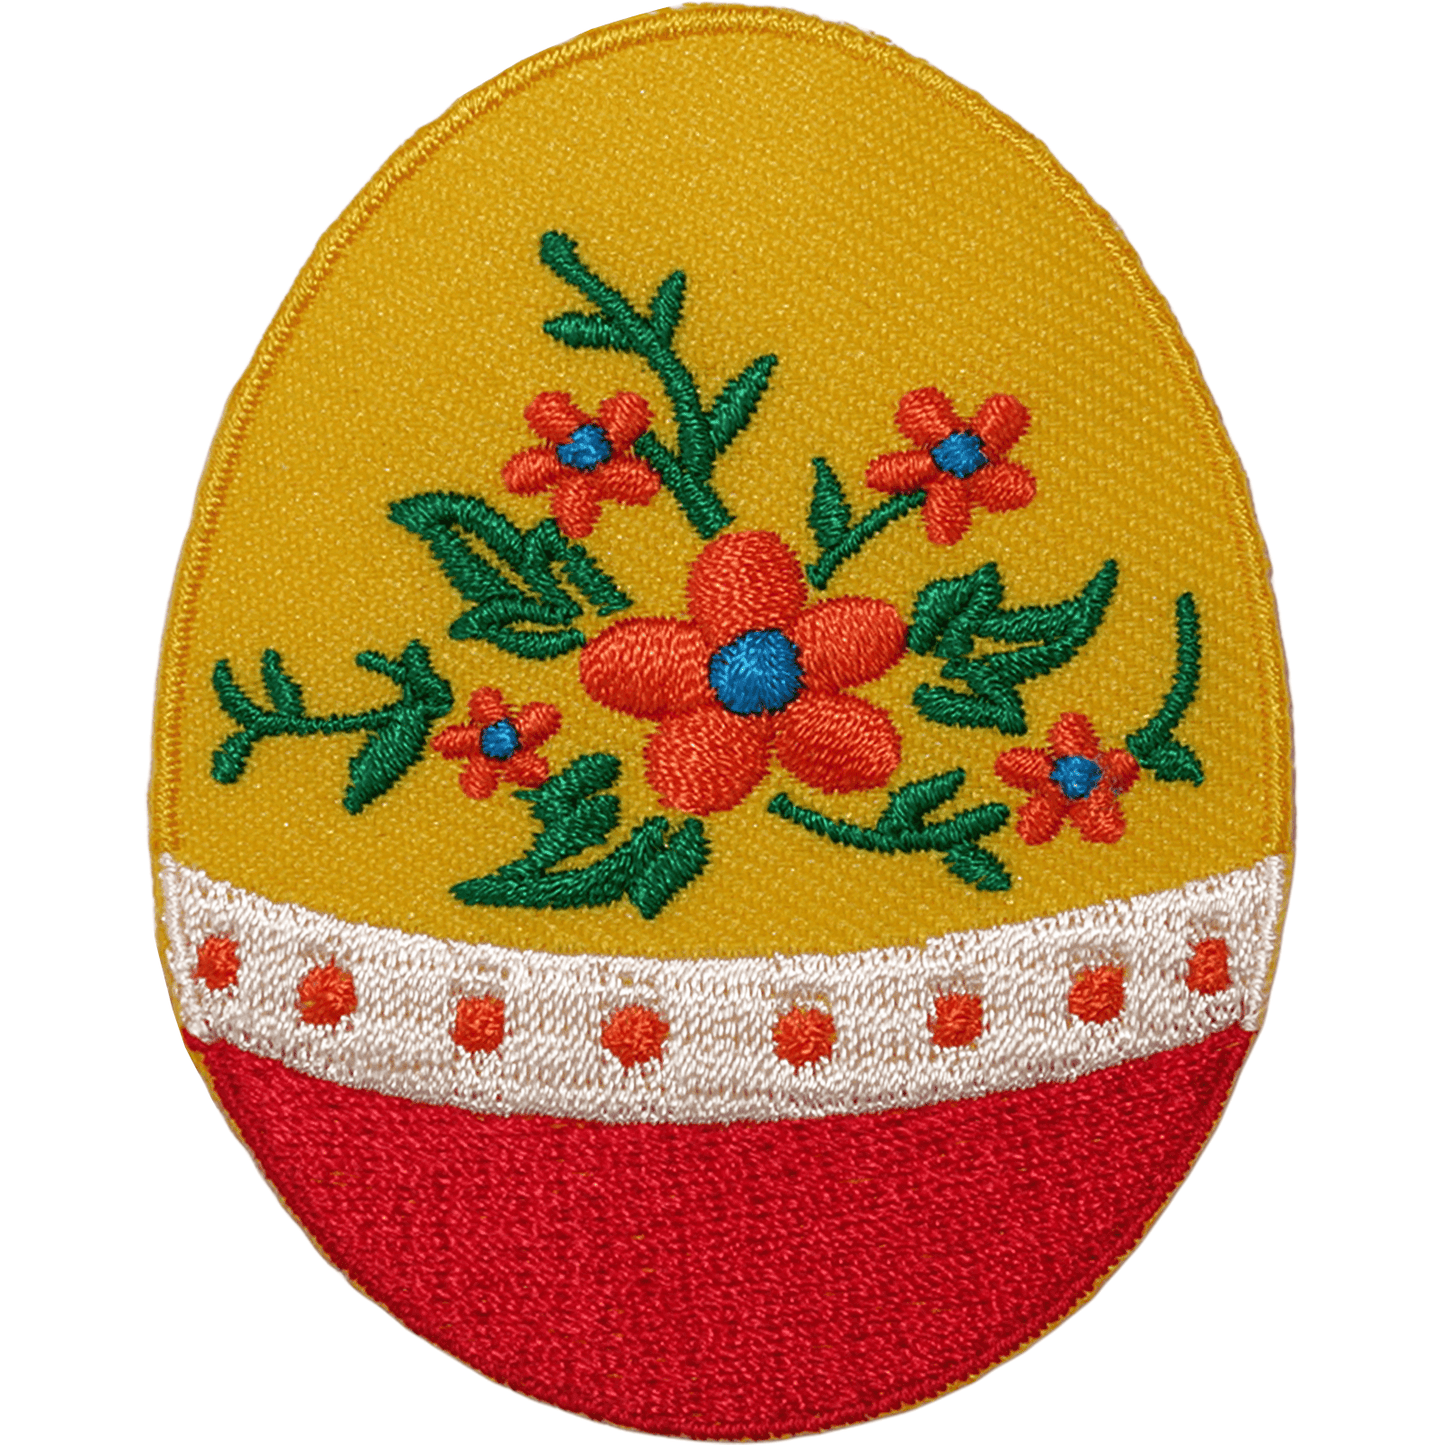 Easter Egg Iron On Patch Embroidered Badge Faberge Flower Sew Crafts Embroidery